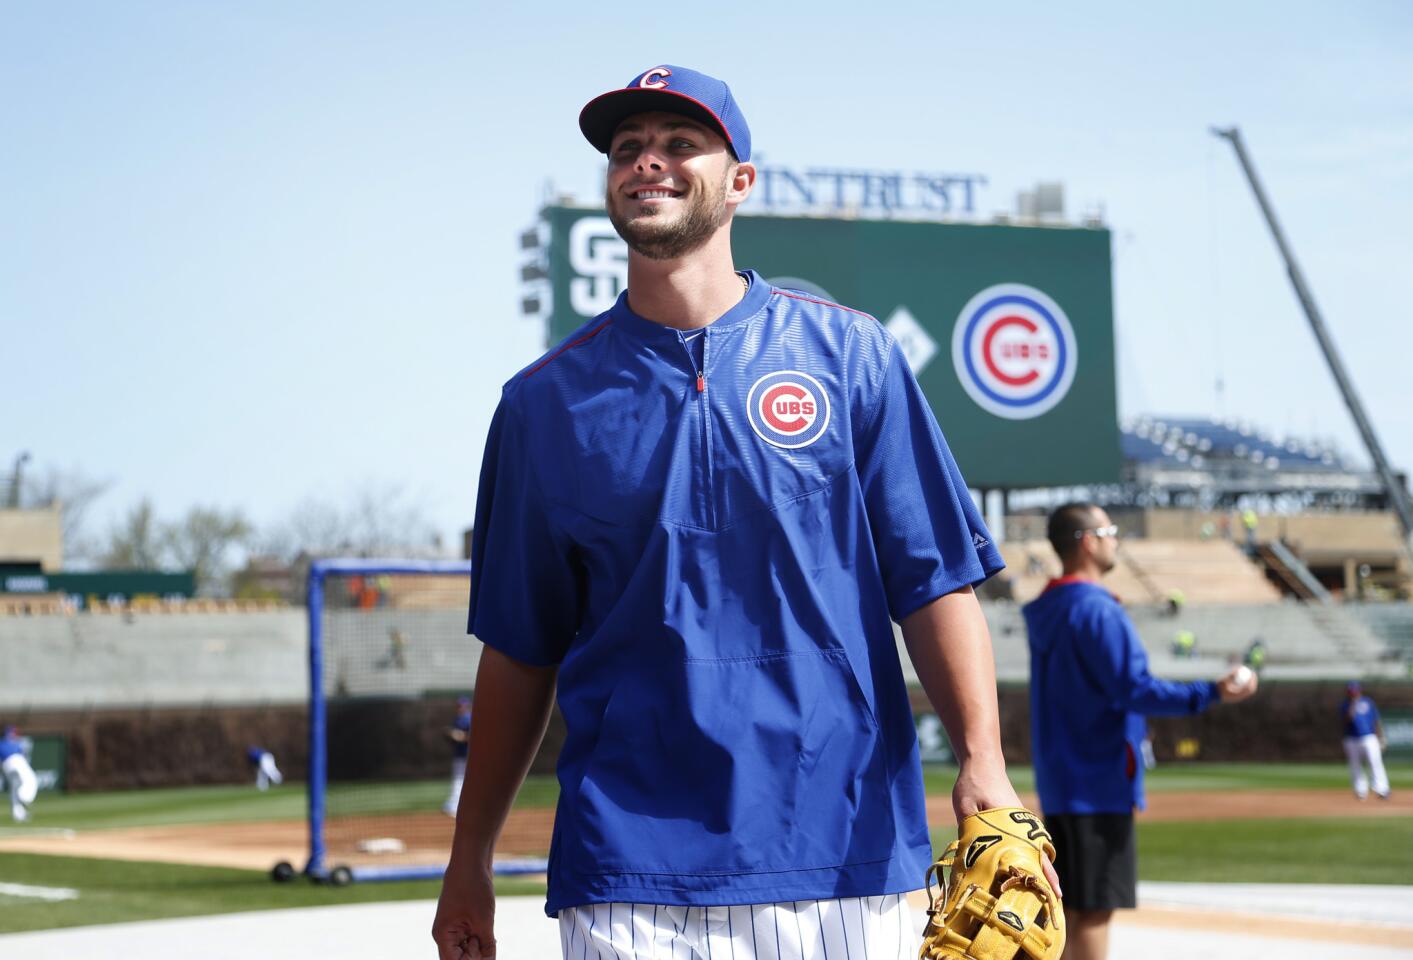 Kris Bryant enters Wrigley Field for the first time as a Cub.